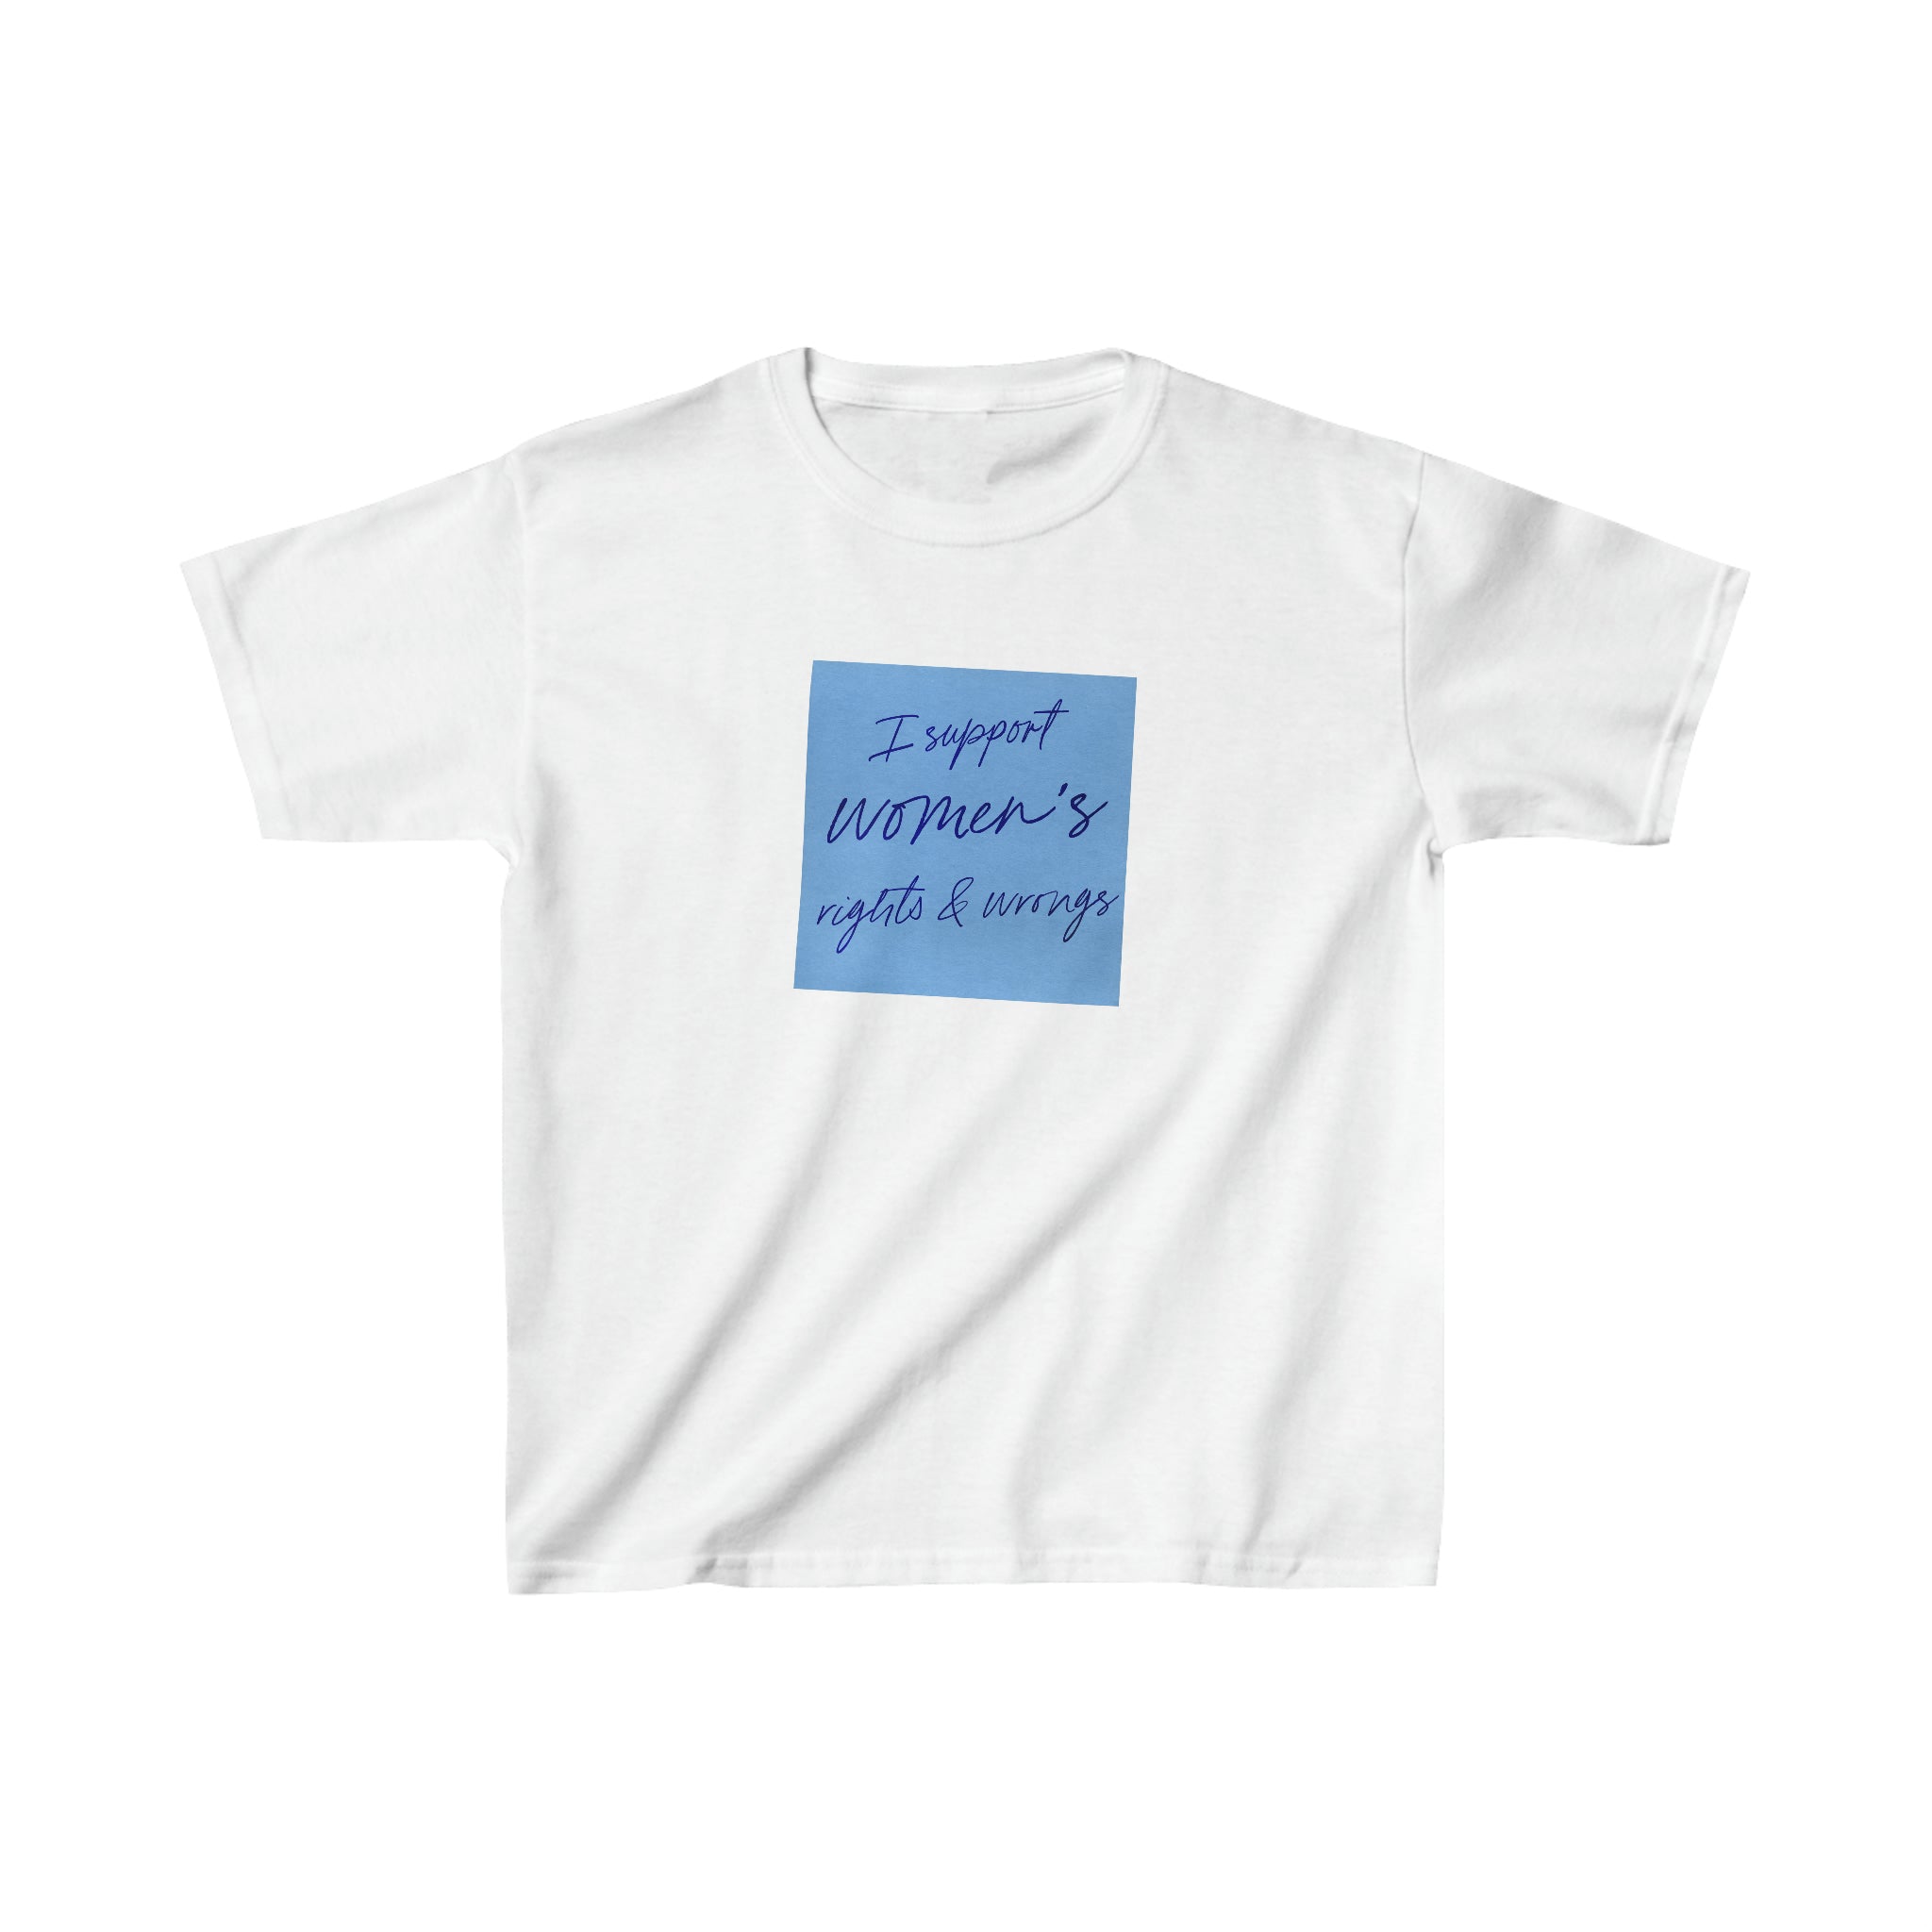 'I support women's rights & wrongs' baby tee - In Print We Trust